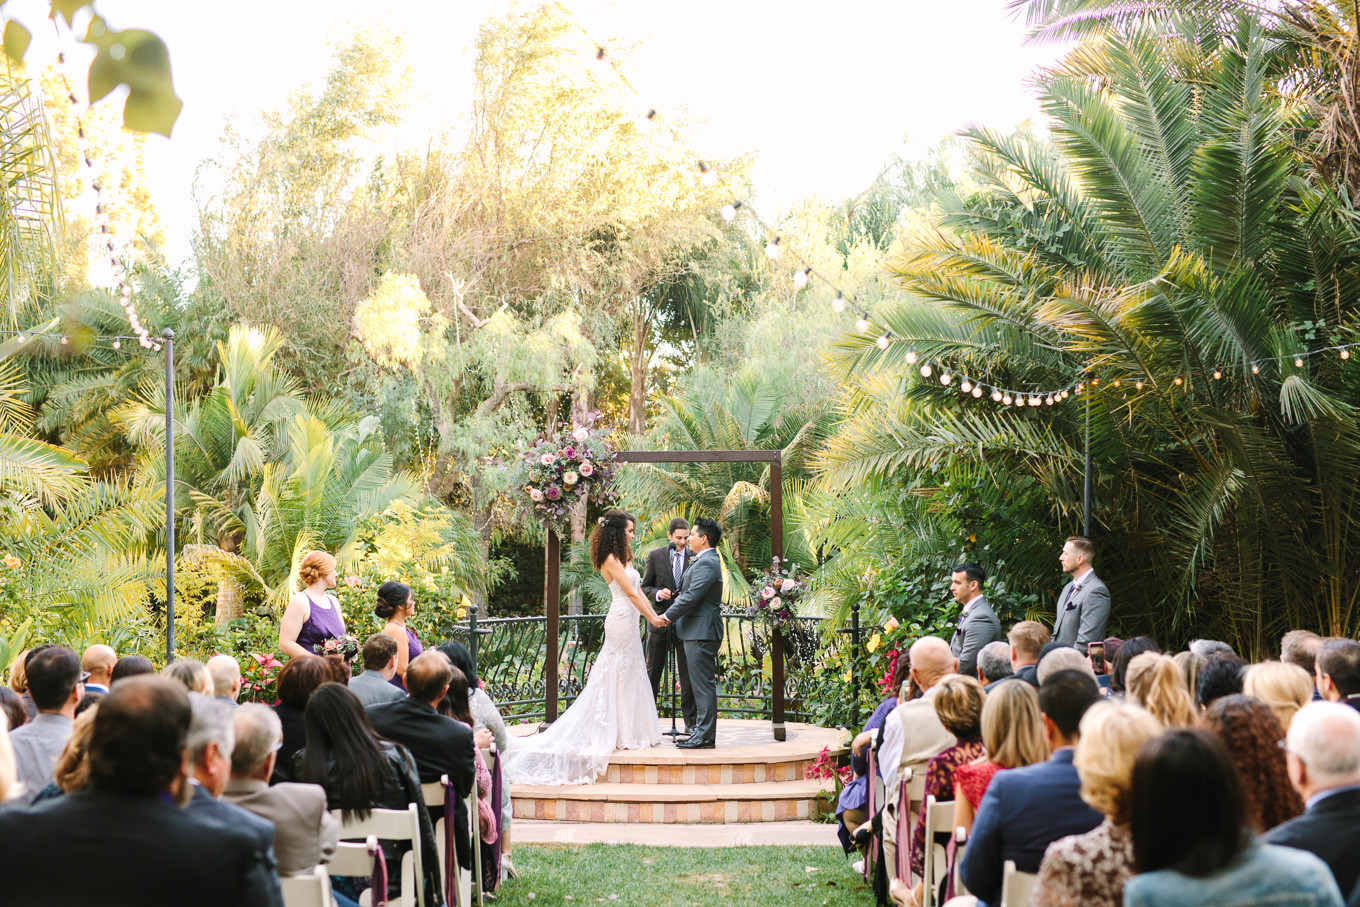 Eden Gardens wedding ceremony | Best Southern California Garden Wedding Venues | Colorful and elevated wedding photography for fun-loving couples | #gardenvenue #weddingvenue #socalweddingvenue #bouquetideas #uniquebouquet   Source: Mary Costa Photography | Los Angeles 